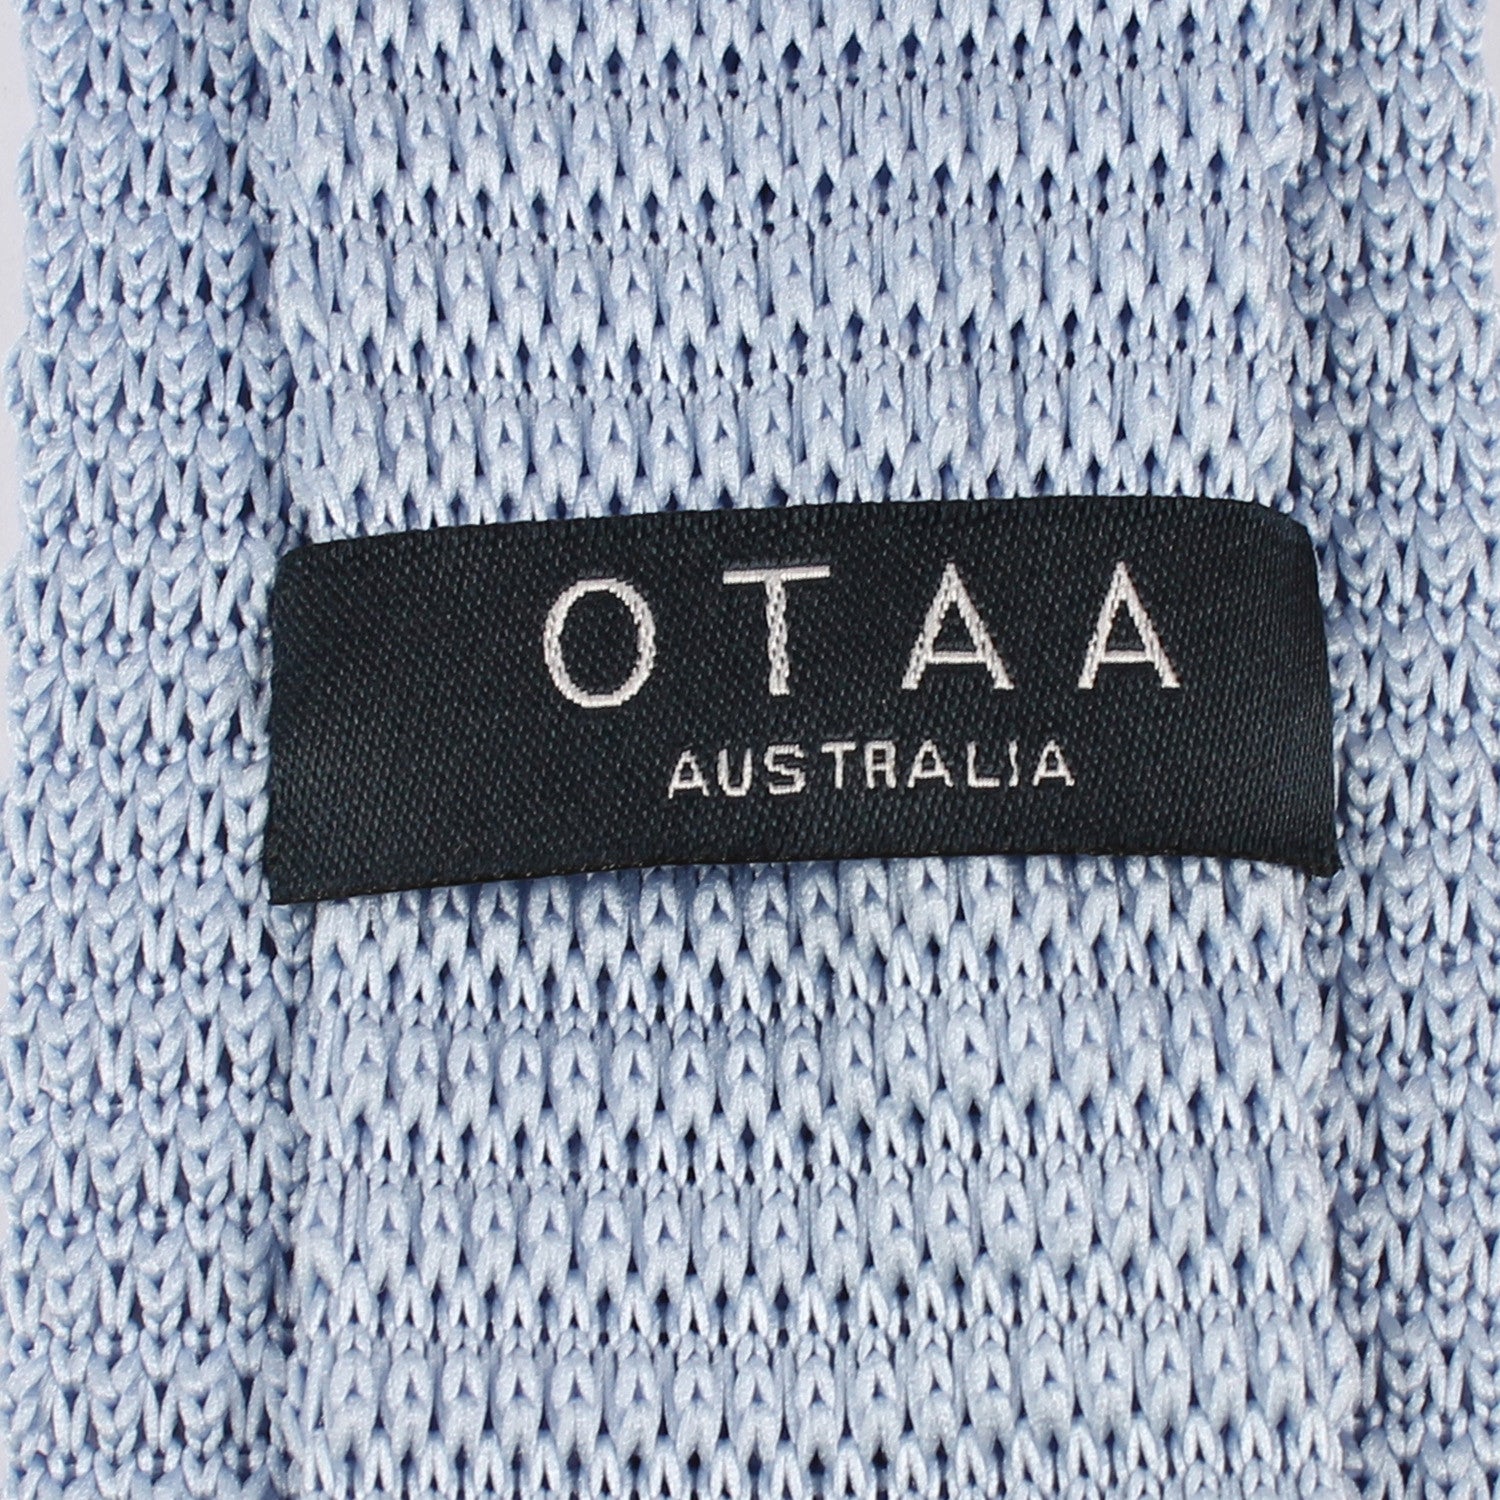 Columbia Light Blue Knitted Tie Back View